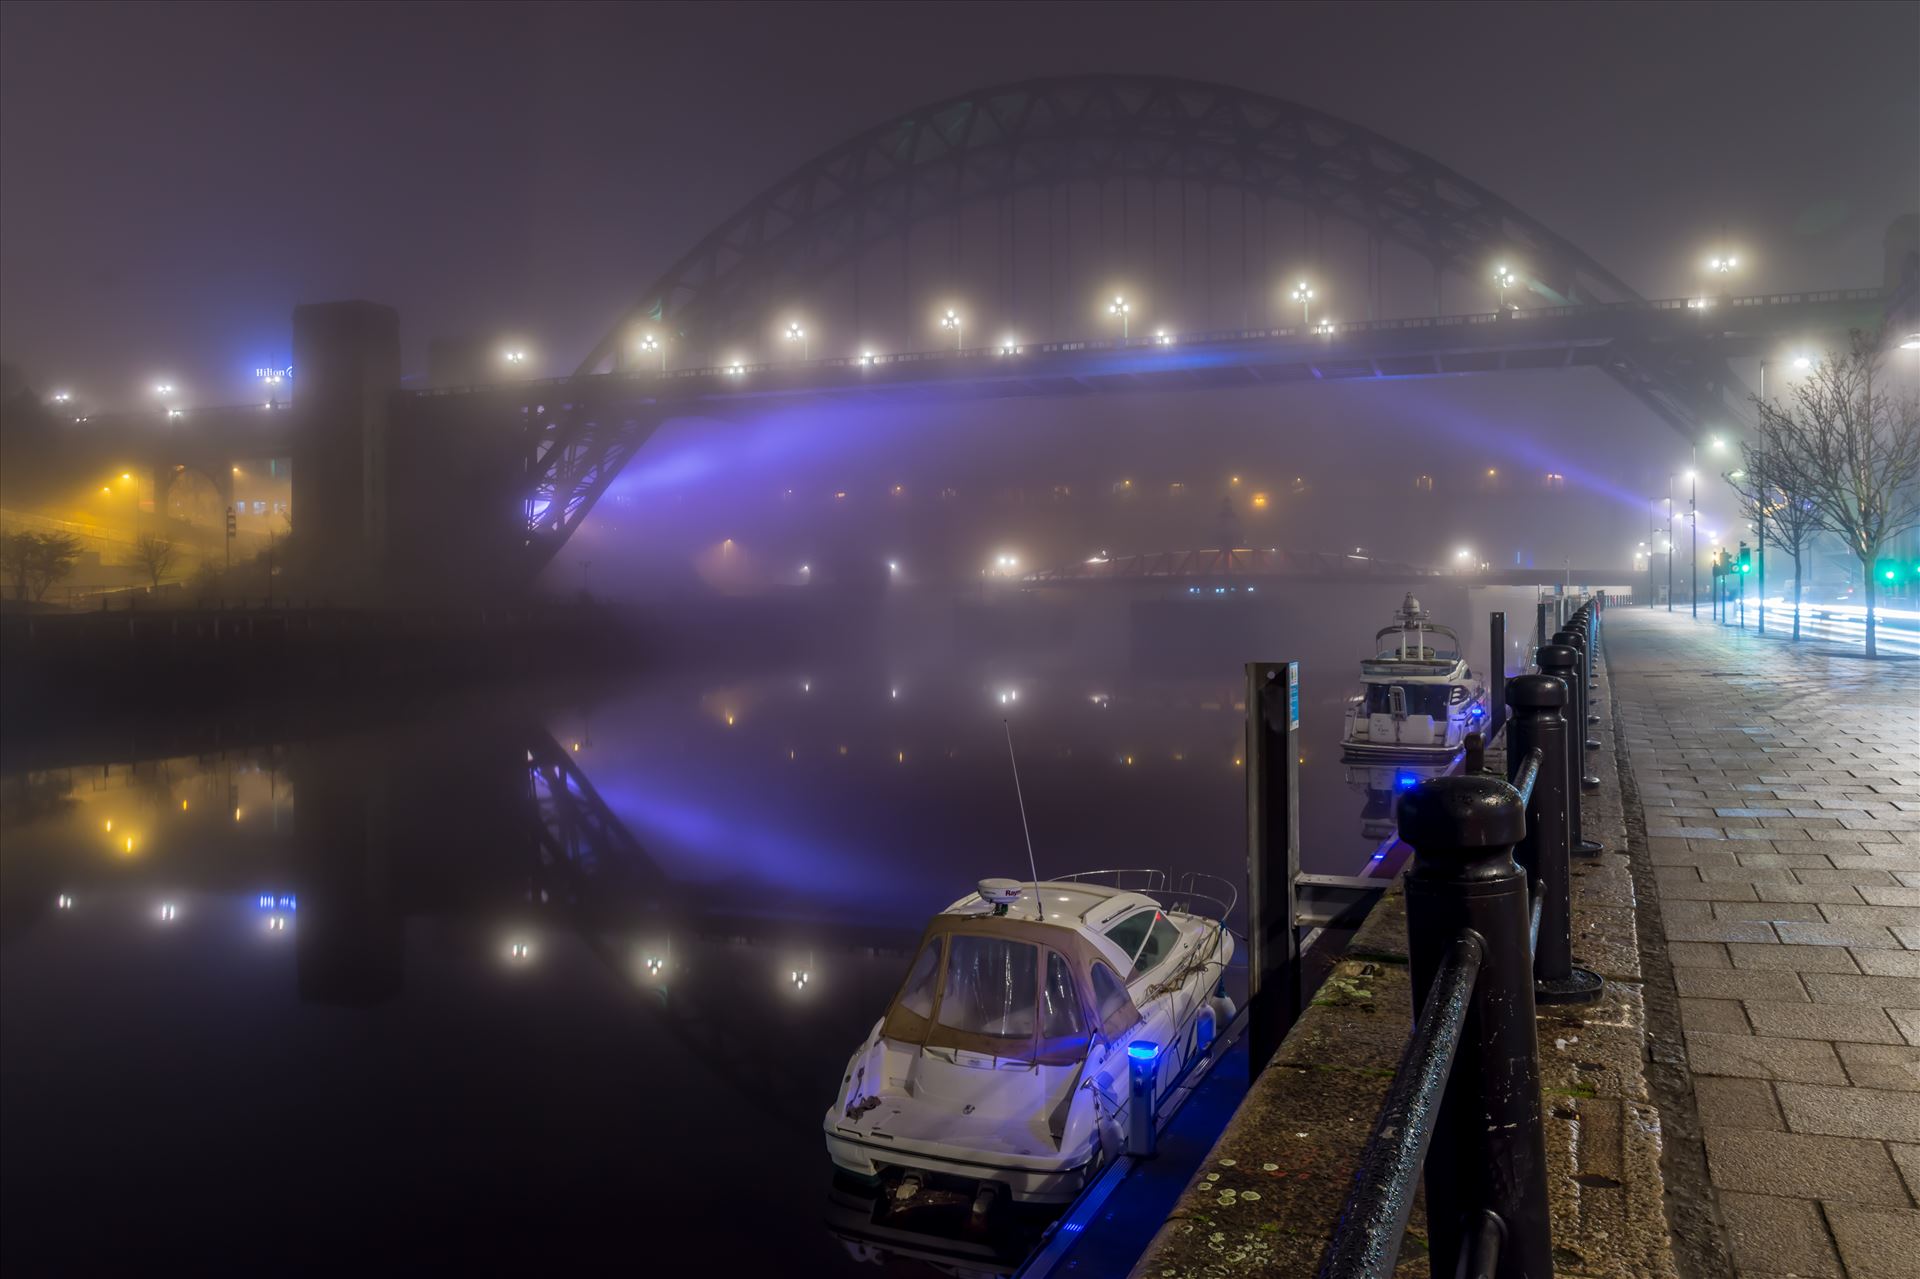 Fog on the Tyne 3 - Shot on the quayside at Newcastle early one foggy morning by philreay